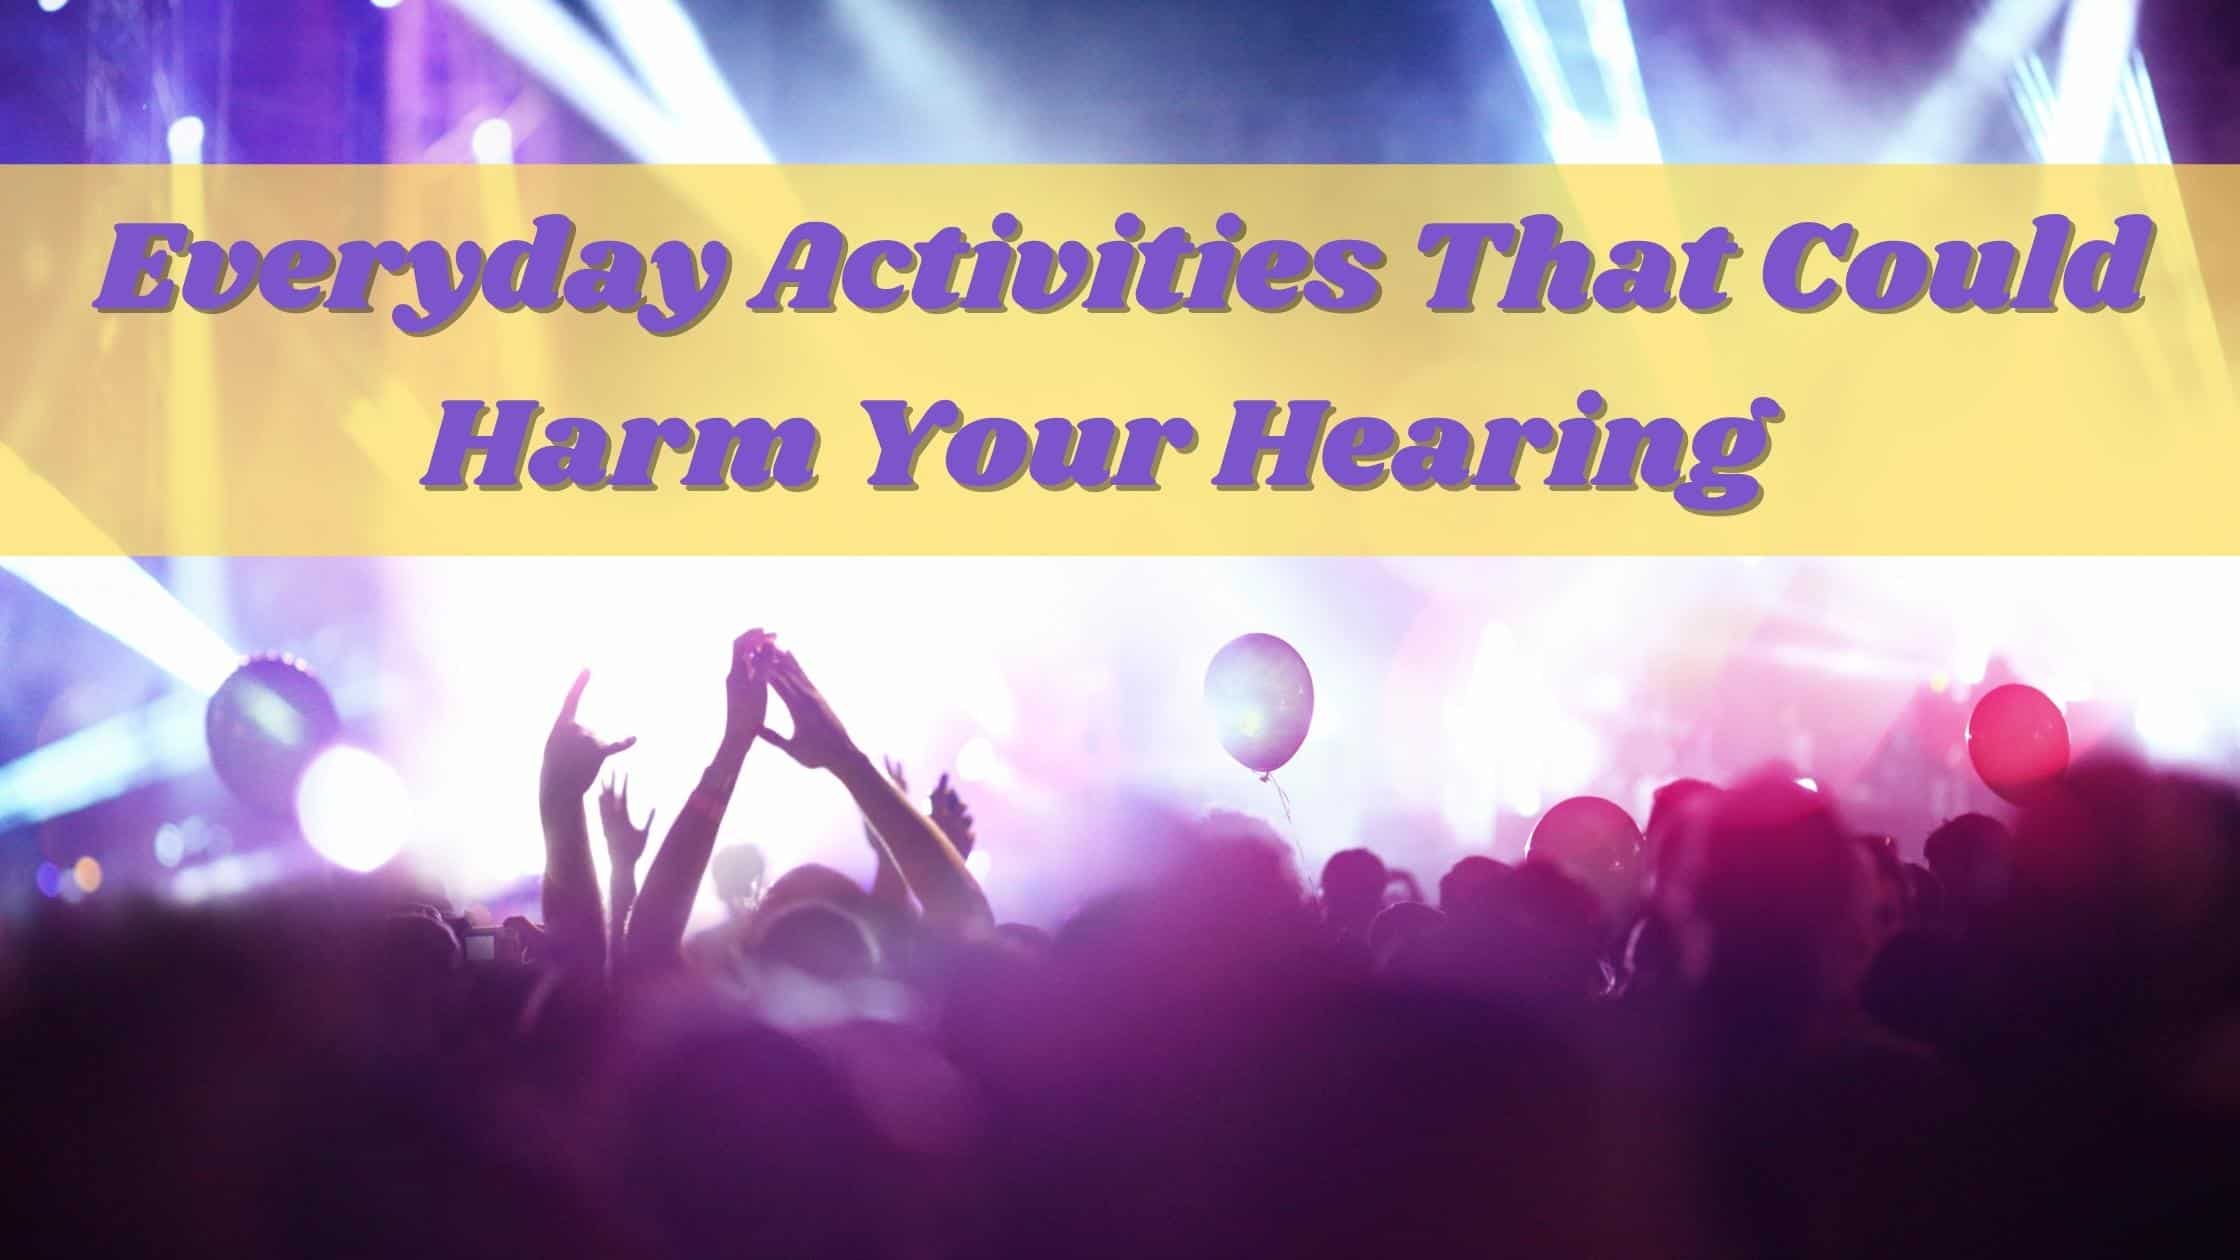 Featured image for “Hearing Risks Associated With Common Daily Activities”